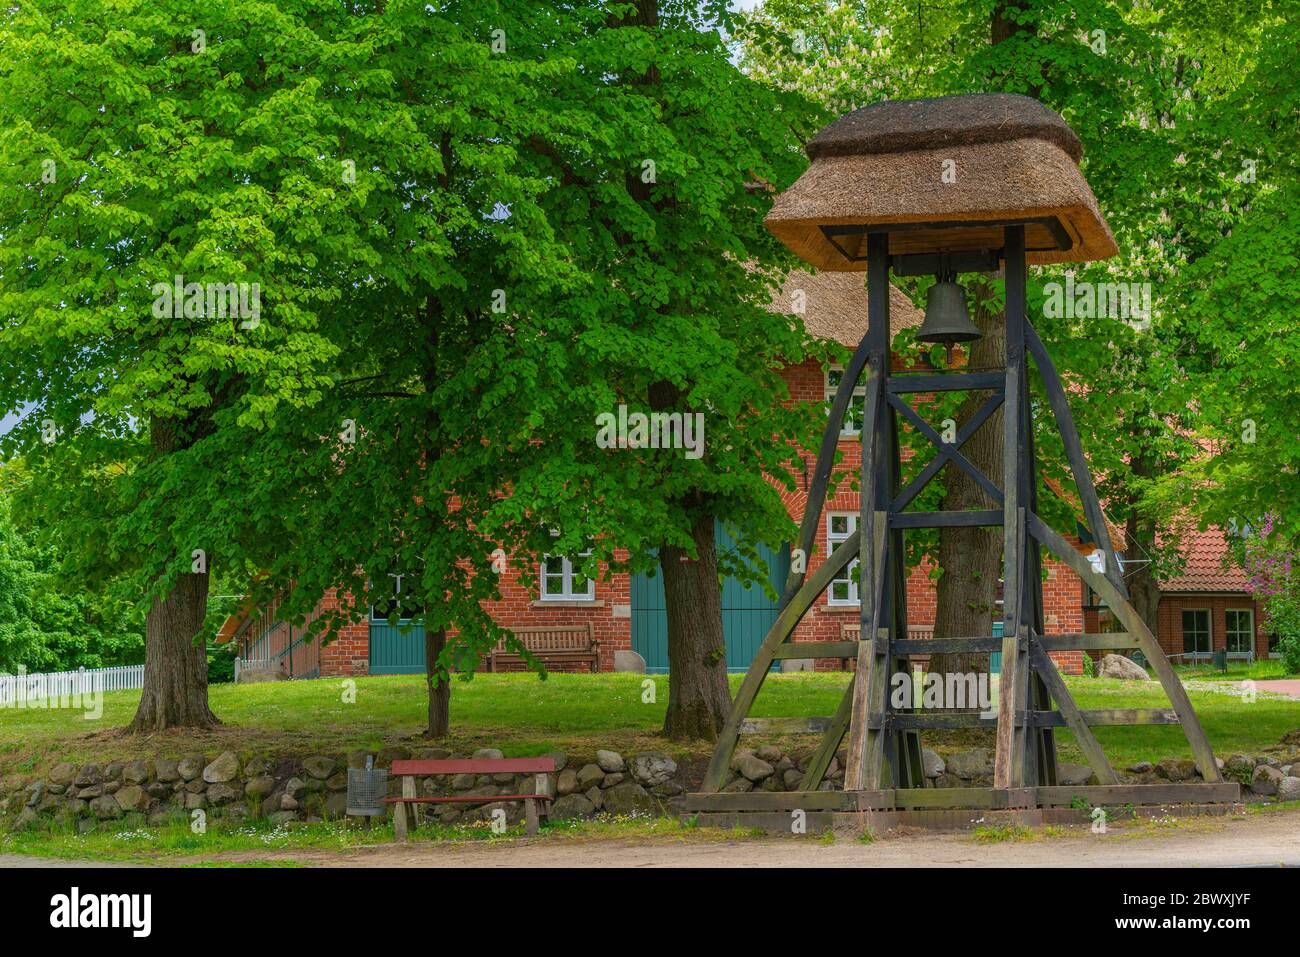 Rathaus or town hall and village bell of the artist village Worpswede, Künstlerdorf Worpswede, District Osterholz, Lower Saxony, Germany Stock Photo